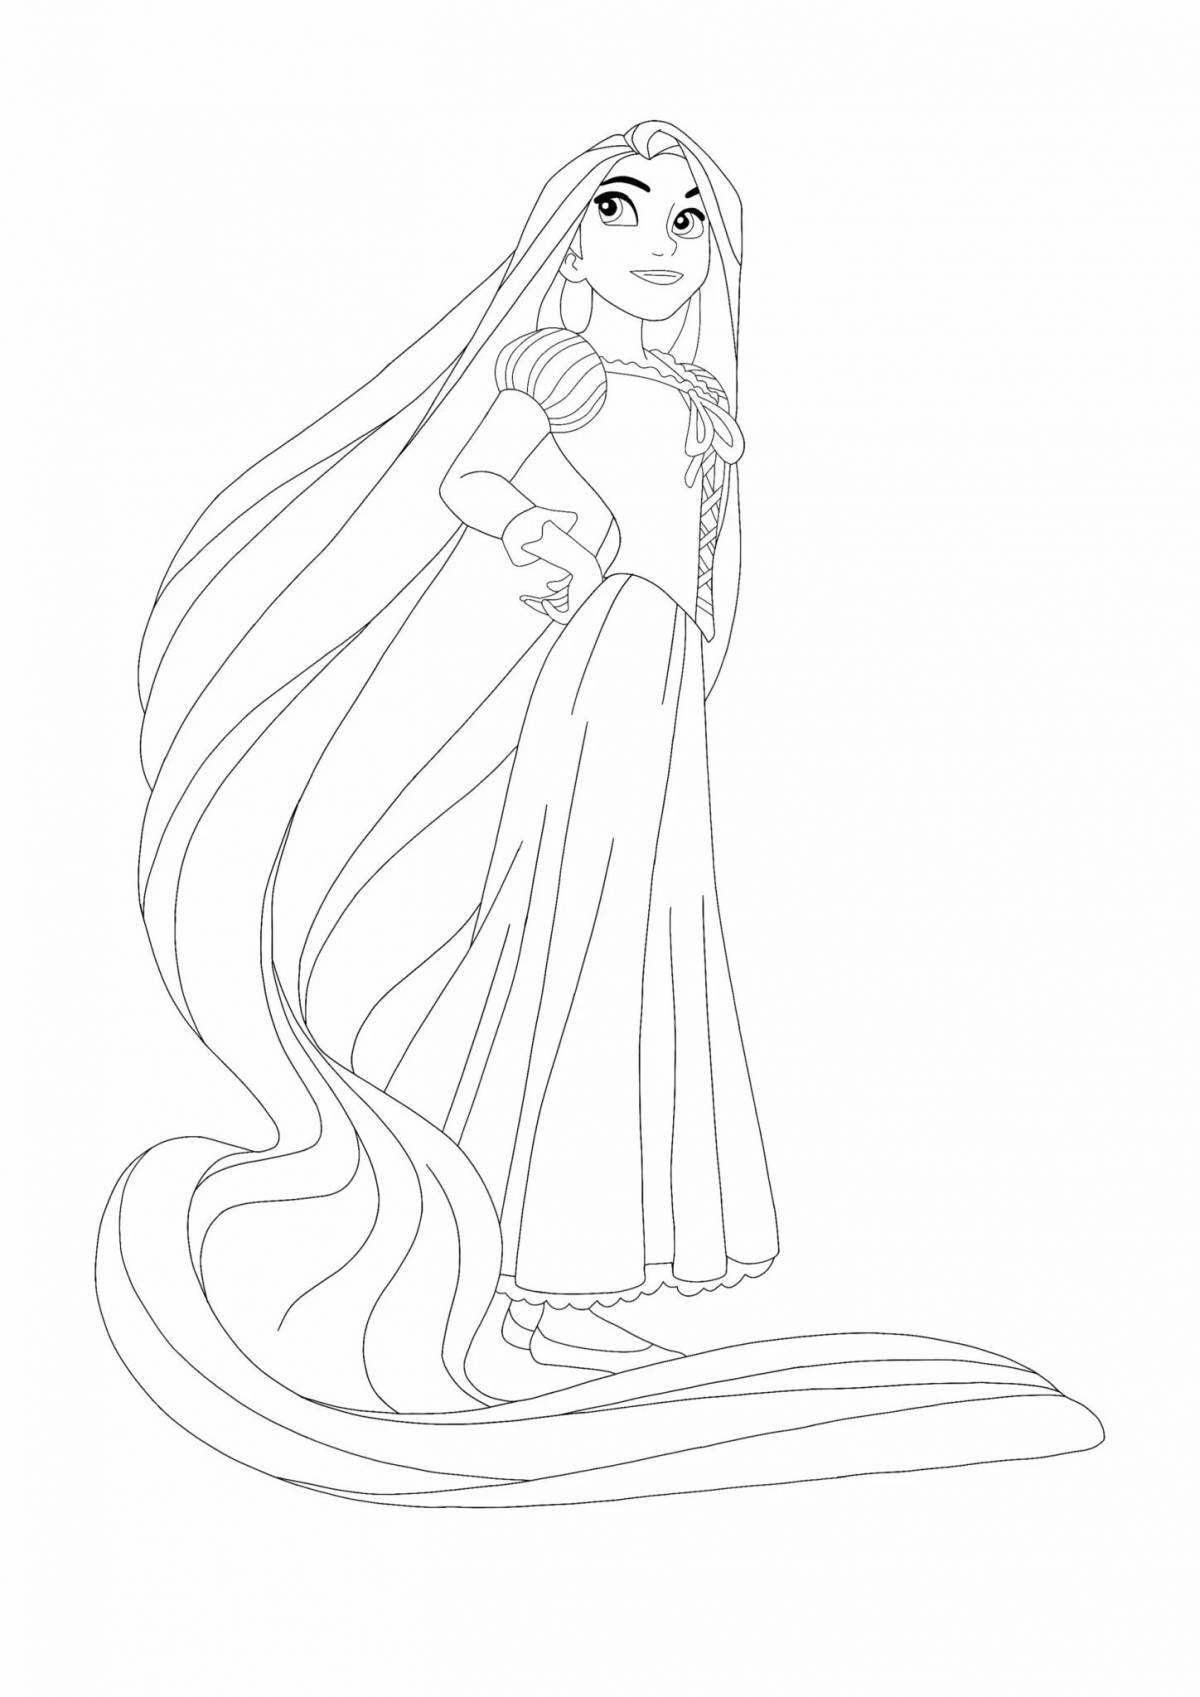 Exquisite long hair princess coloring page